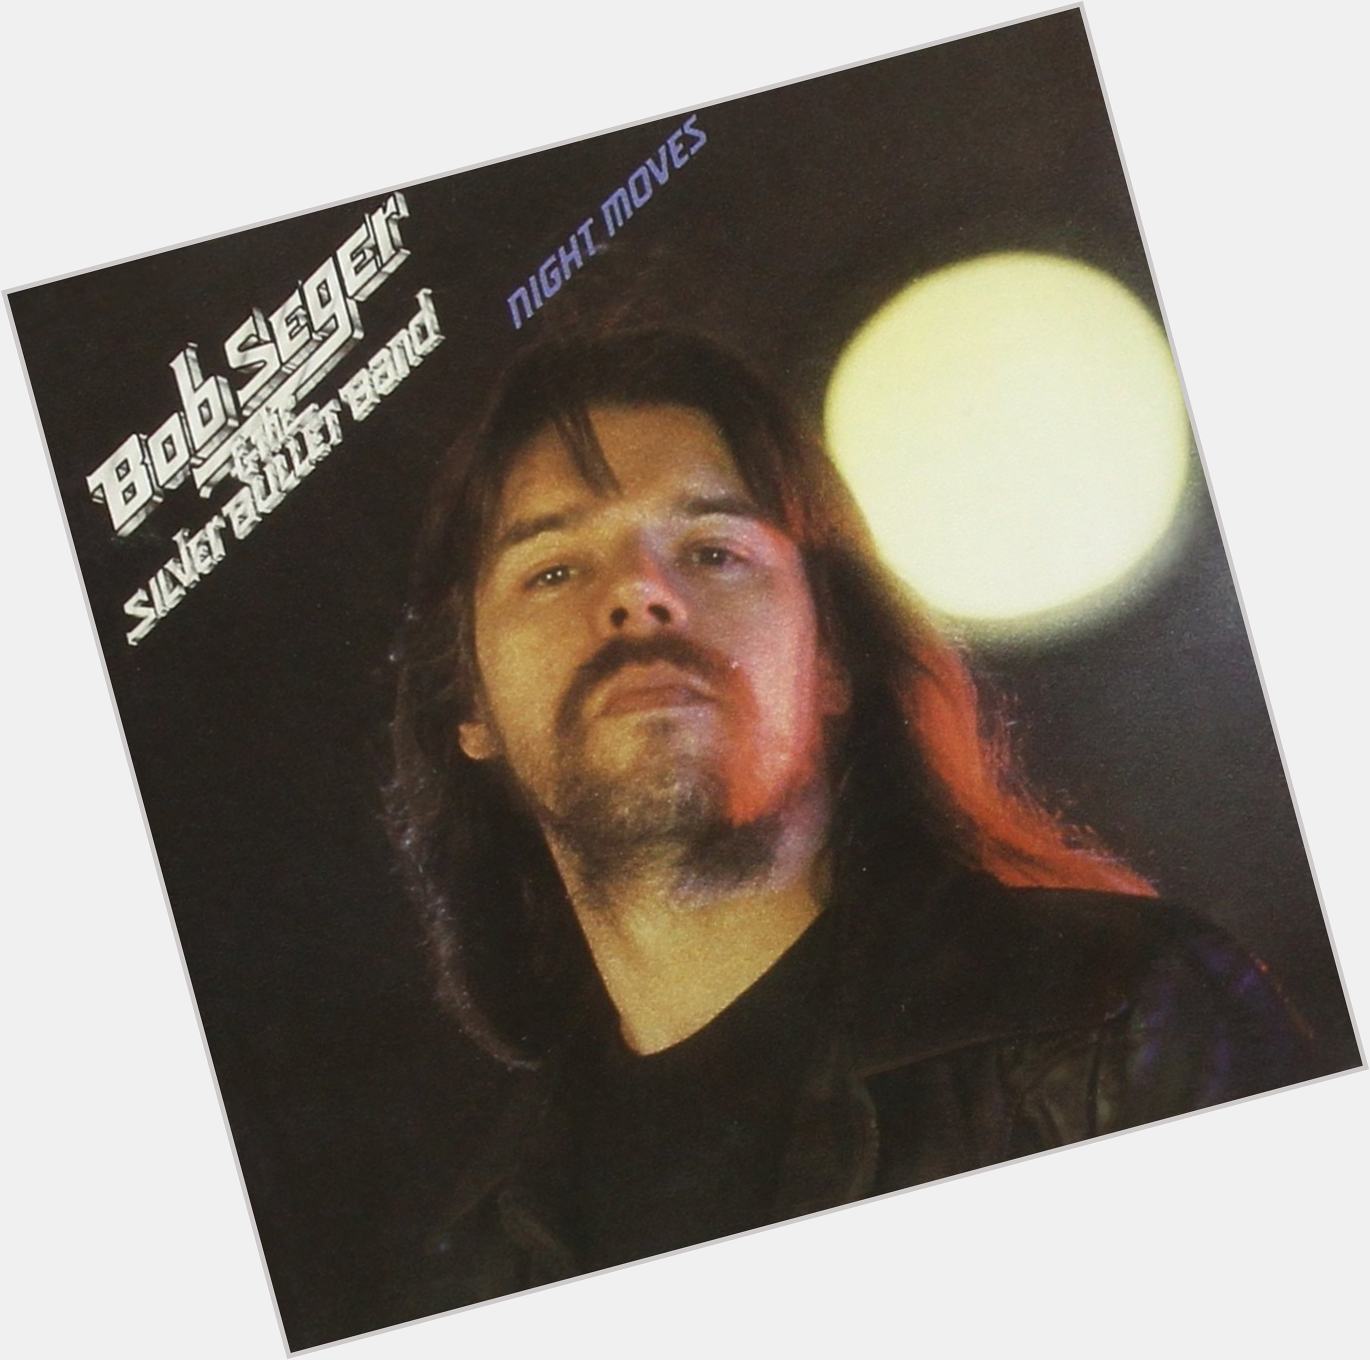 Happy 77th Birthday to Night Moves hitmaker Bob Seger, who was born on this day in 1945! 